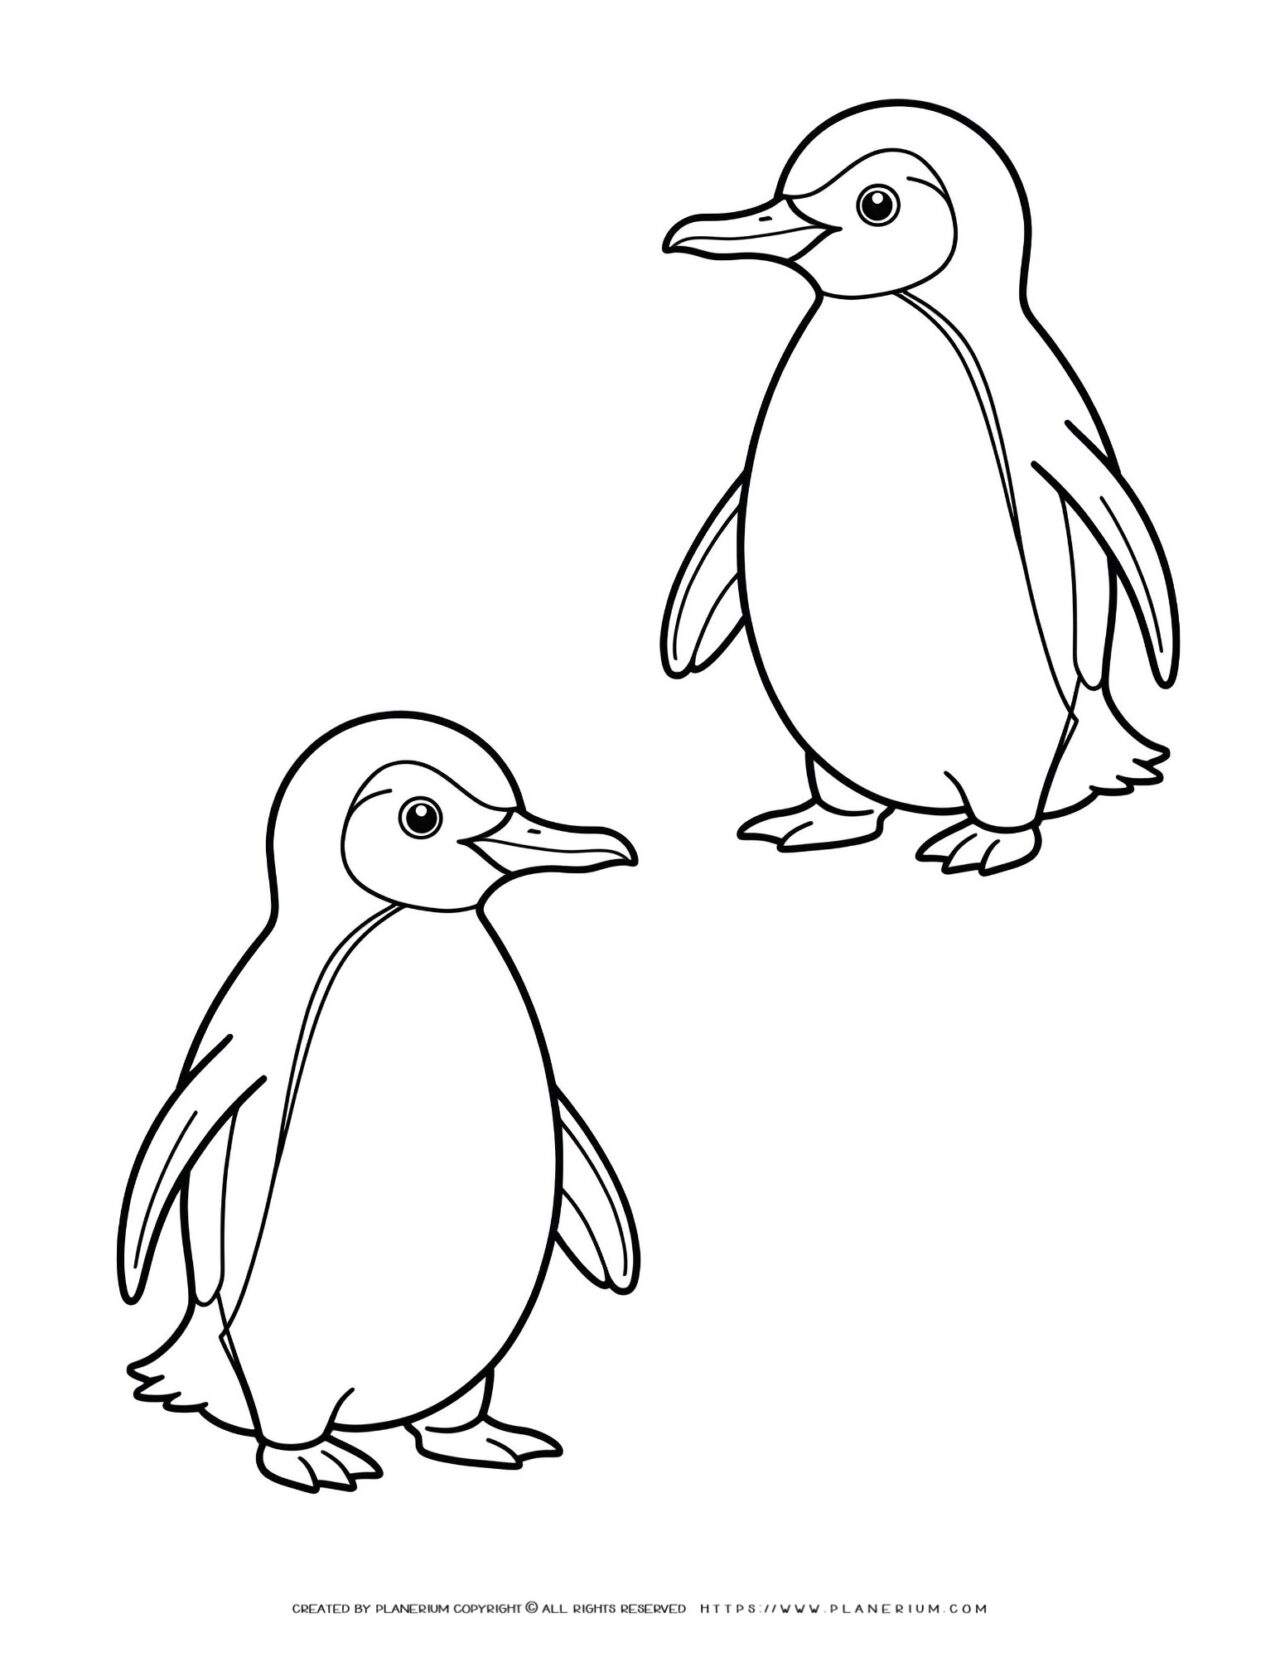 Two-cartoon-penguins-coloring-page-illustration